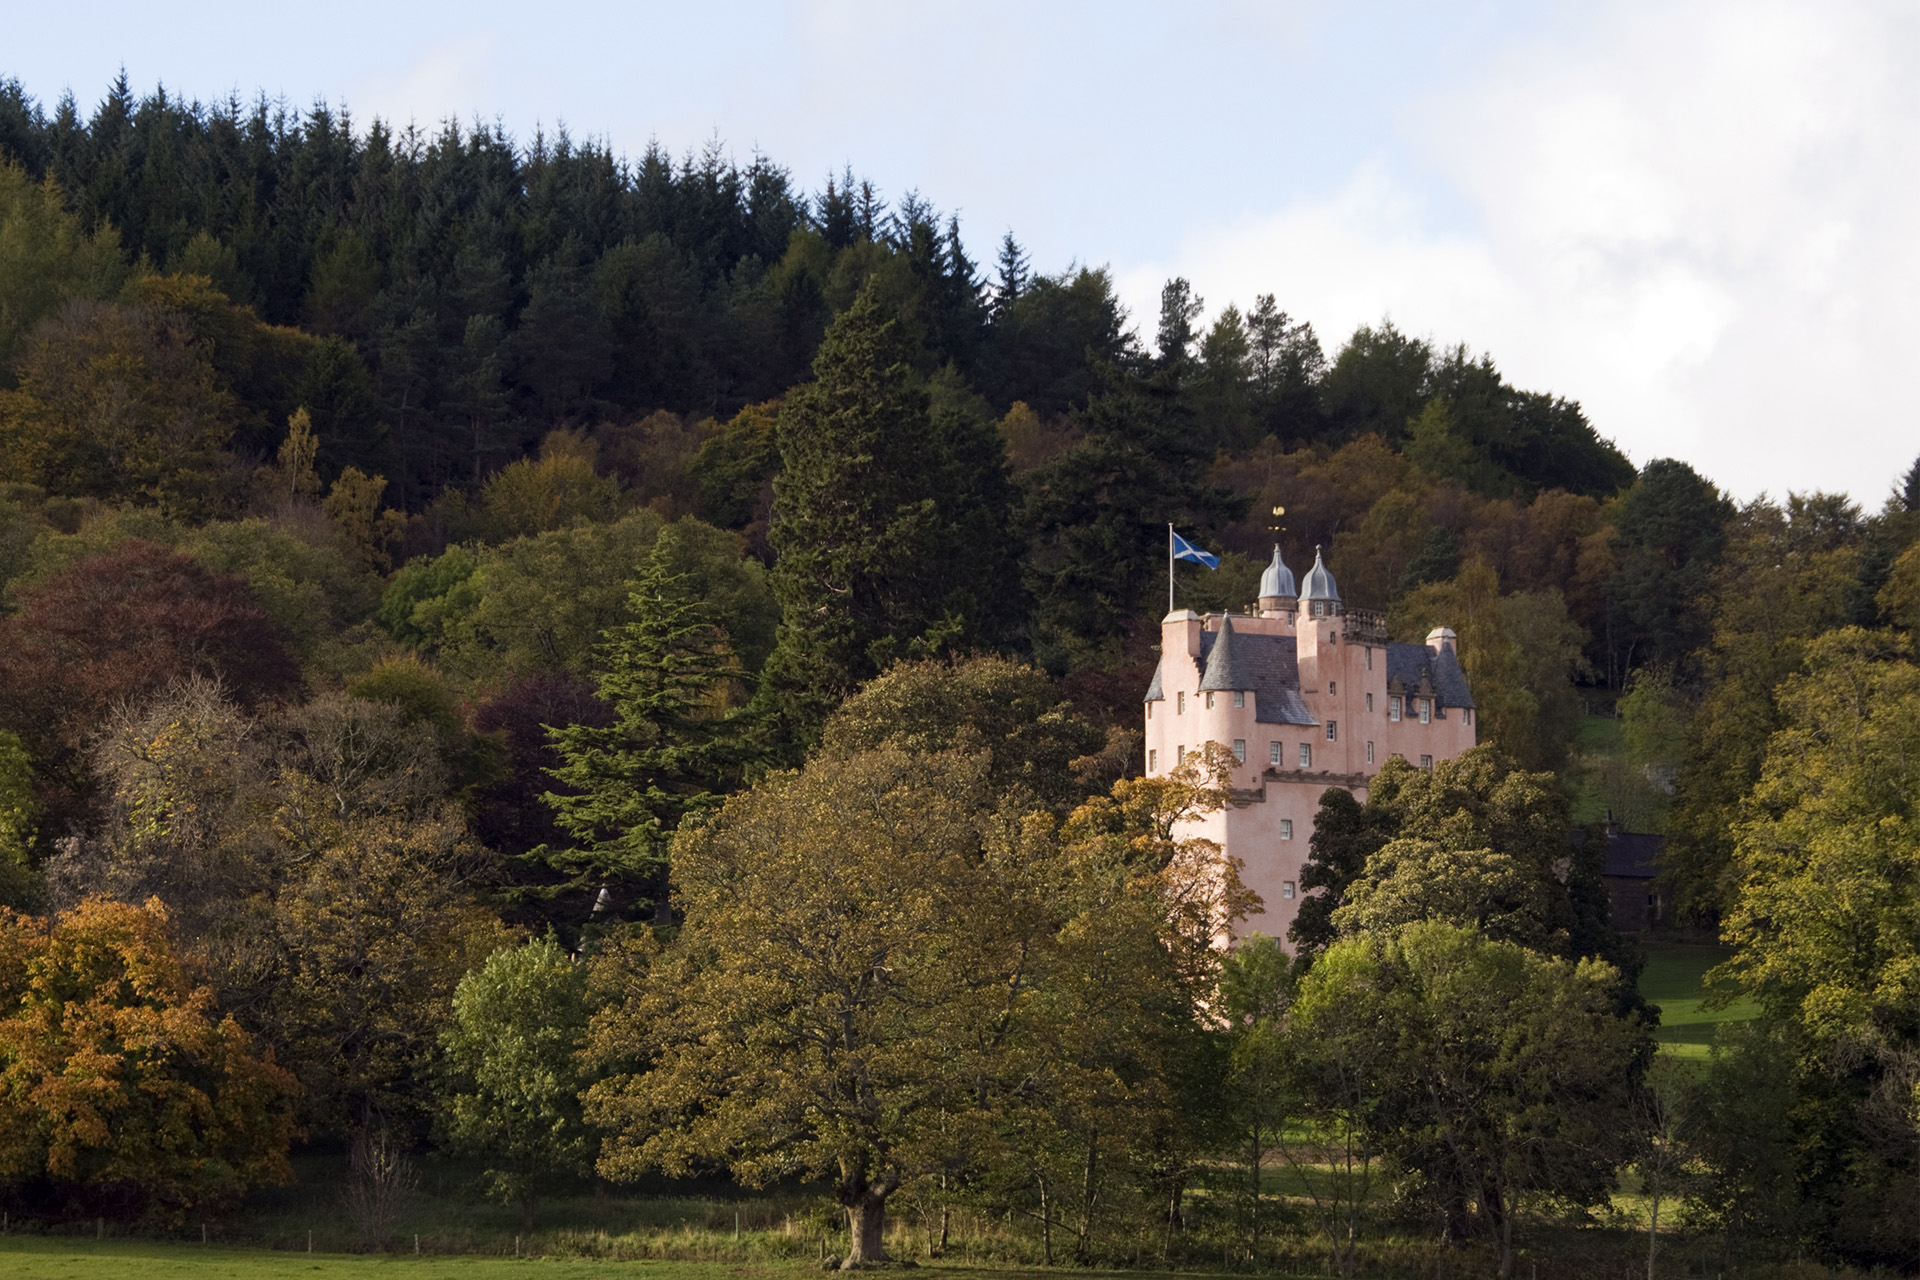 Craigievar Castle in Aberdeenshire, Scotland, surrounded by trees in autumn colours.